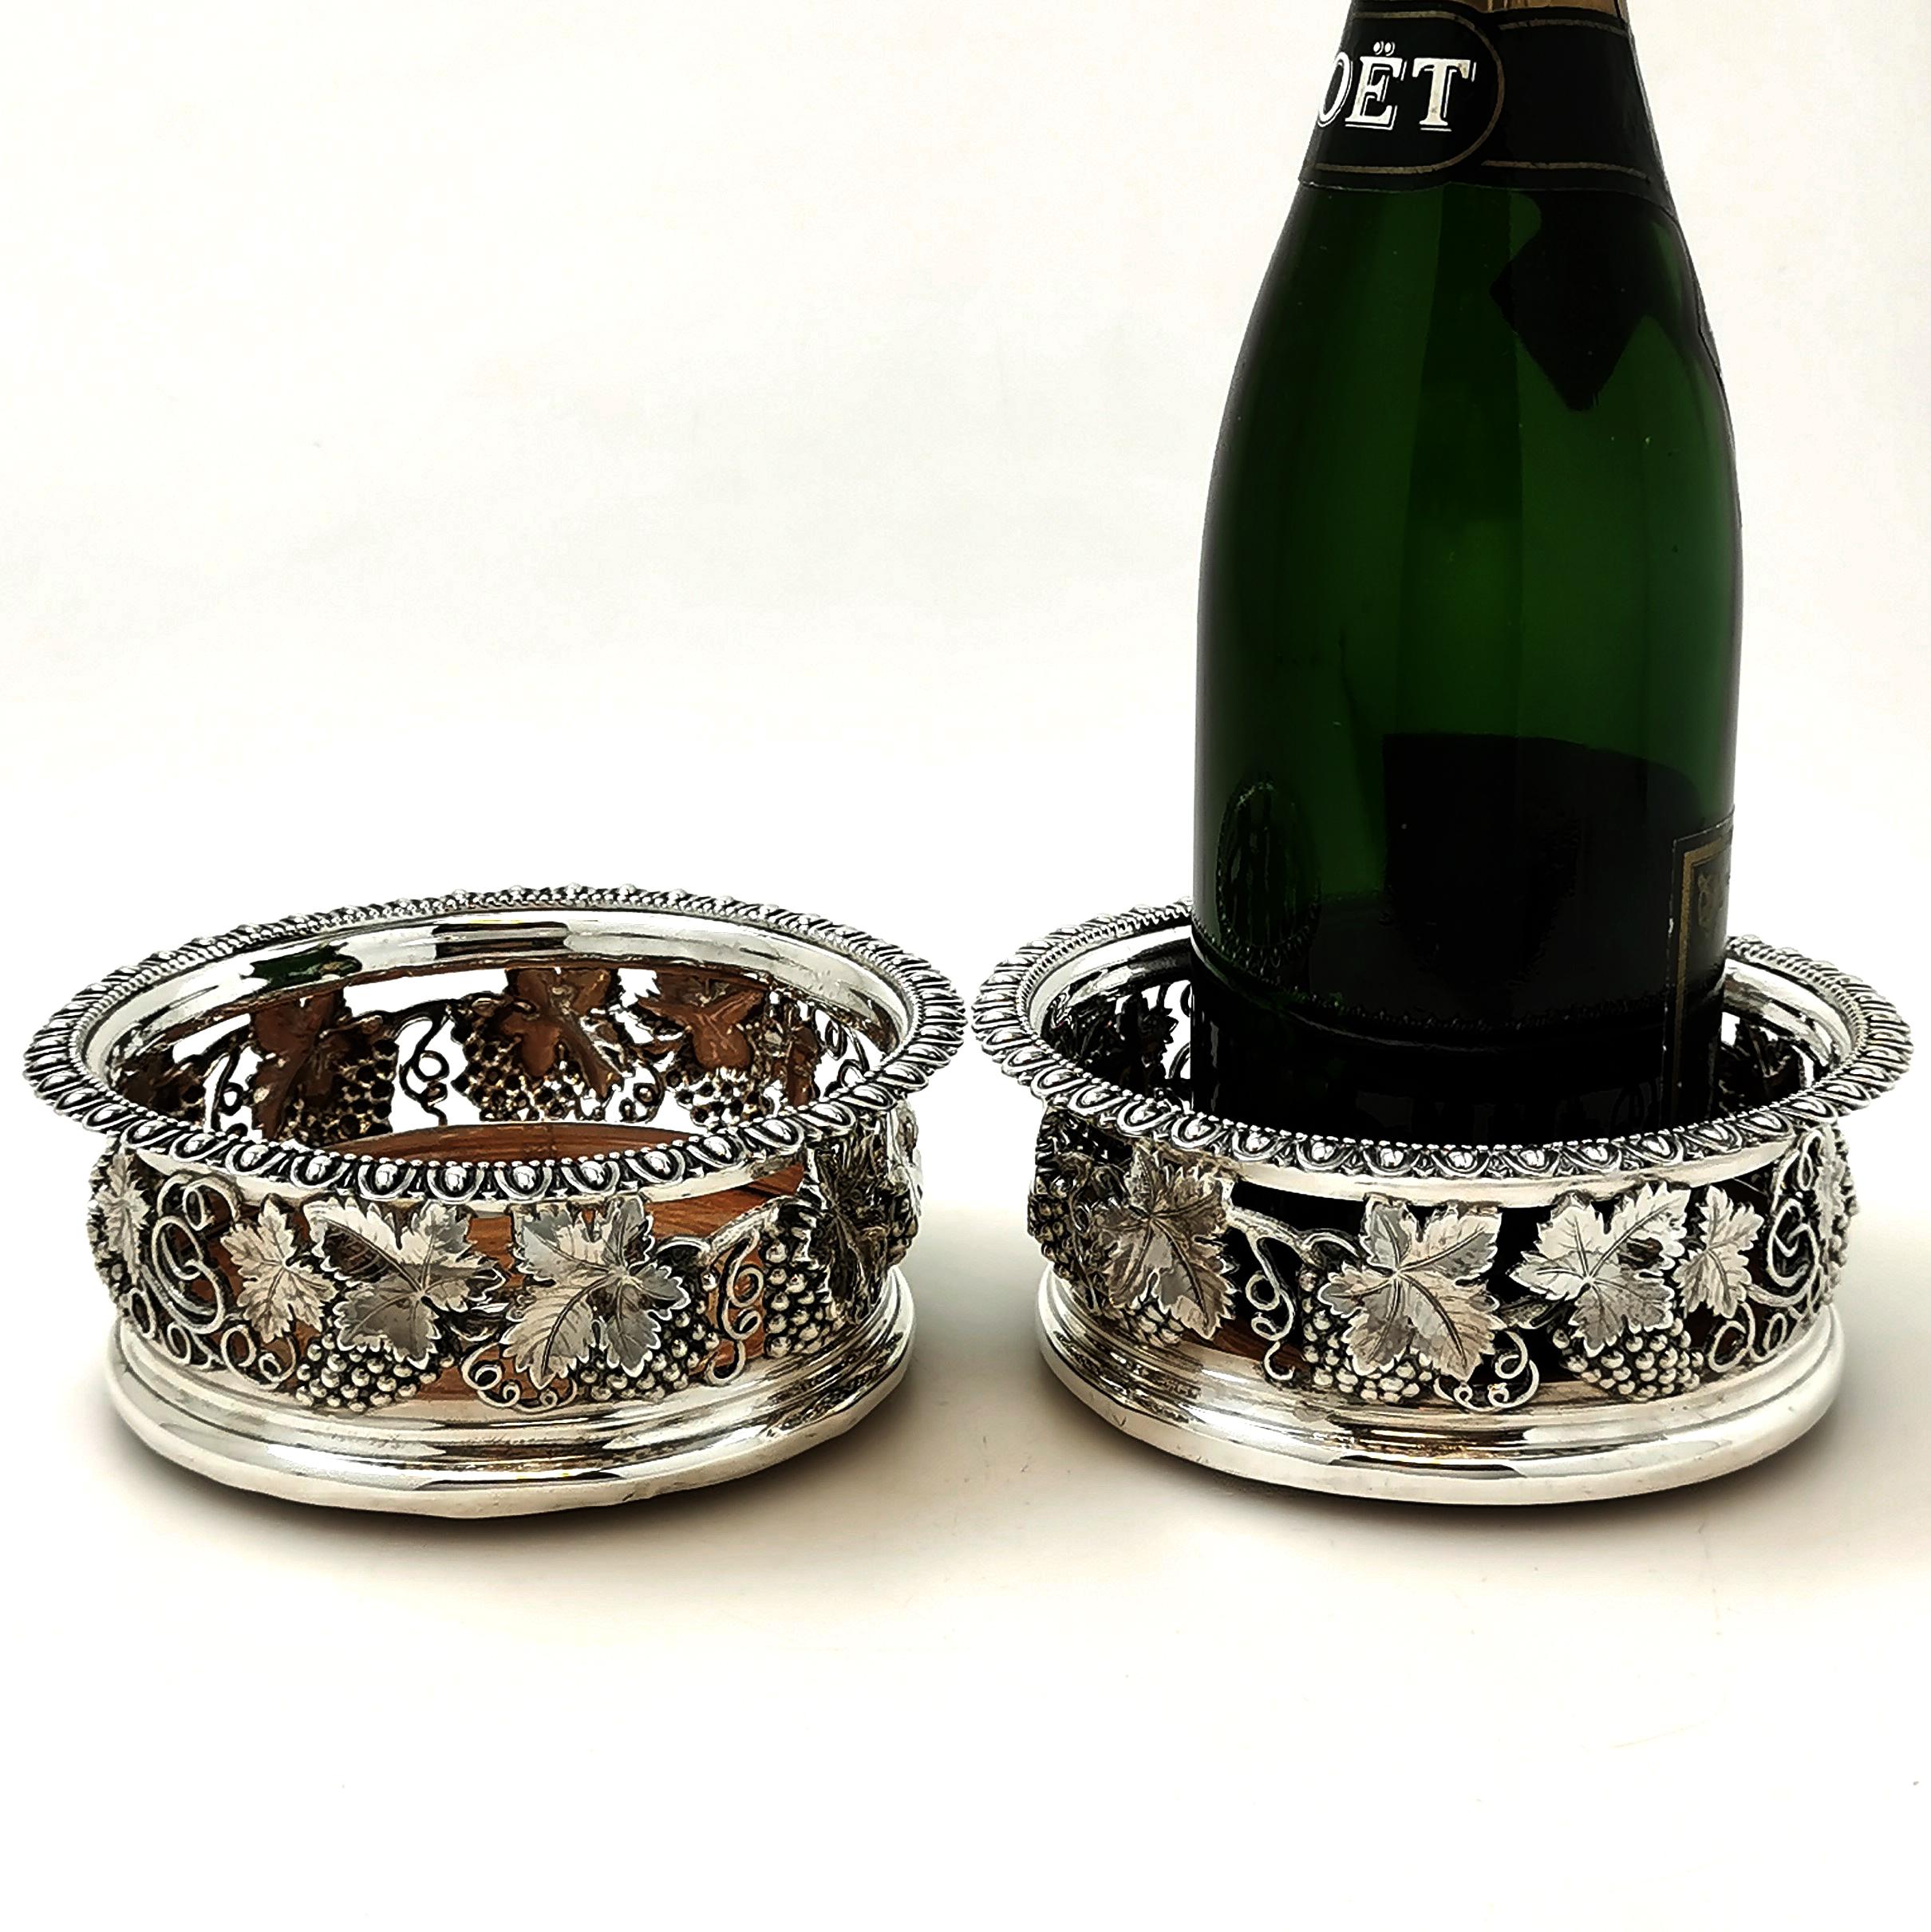 A pair of magnificent Antique George IV Sterling Silver Wine Bottle Coasters with an impressive chased and pierced grape vine and leaf design. The Coasters have a wooden base with a plain Silver central button.

Made in Sheffield in 1821 by Smith,